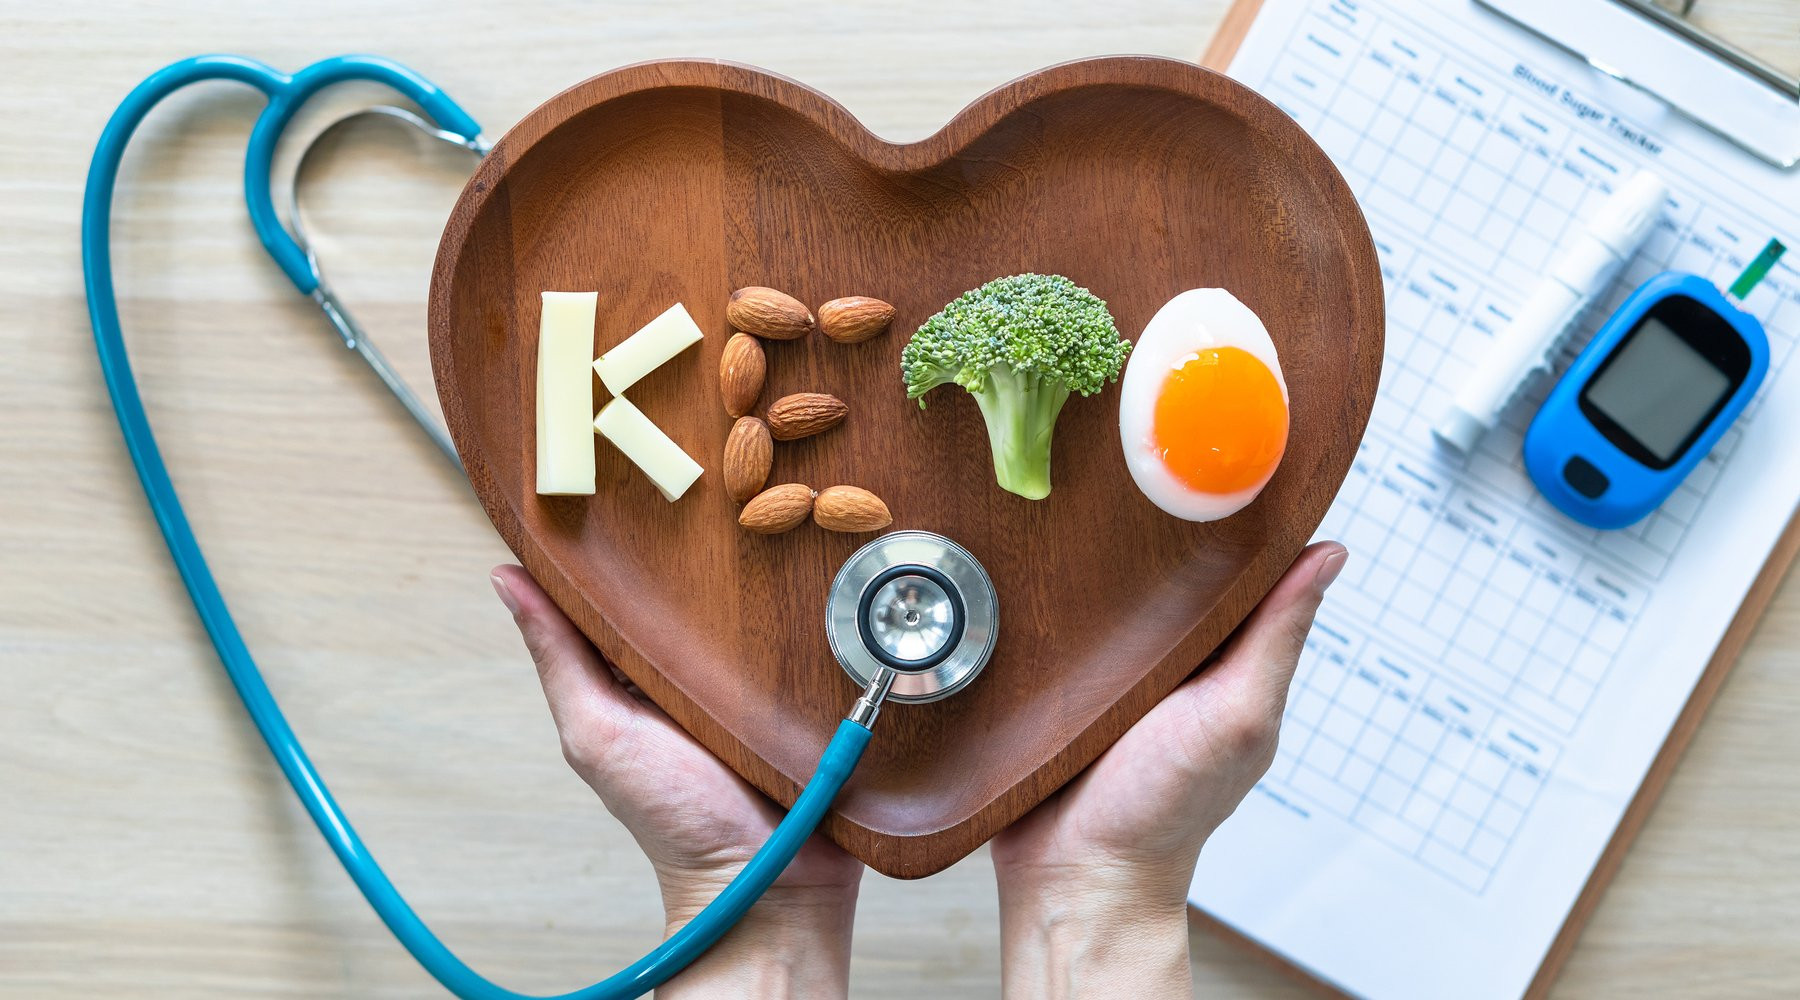 Heart Healthy Keto
 Why Cardiologists Don’t Re mend Keto for Heart Health